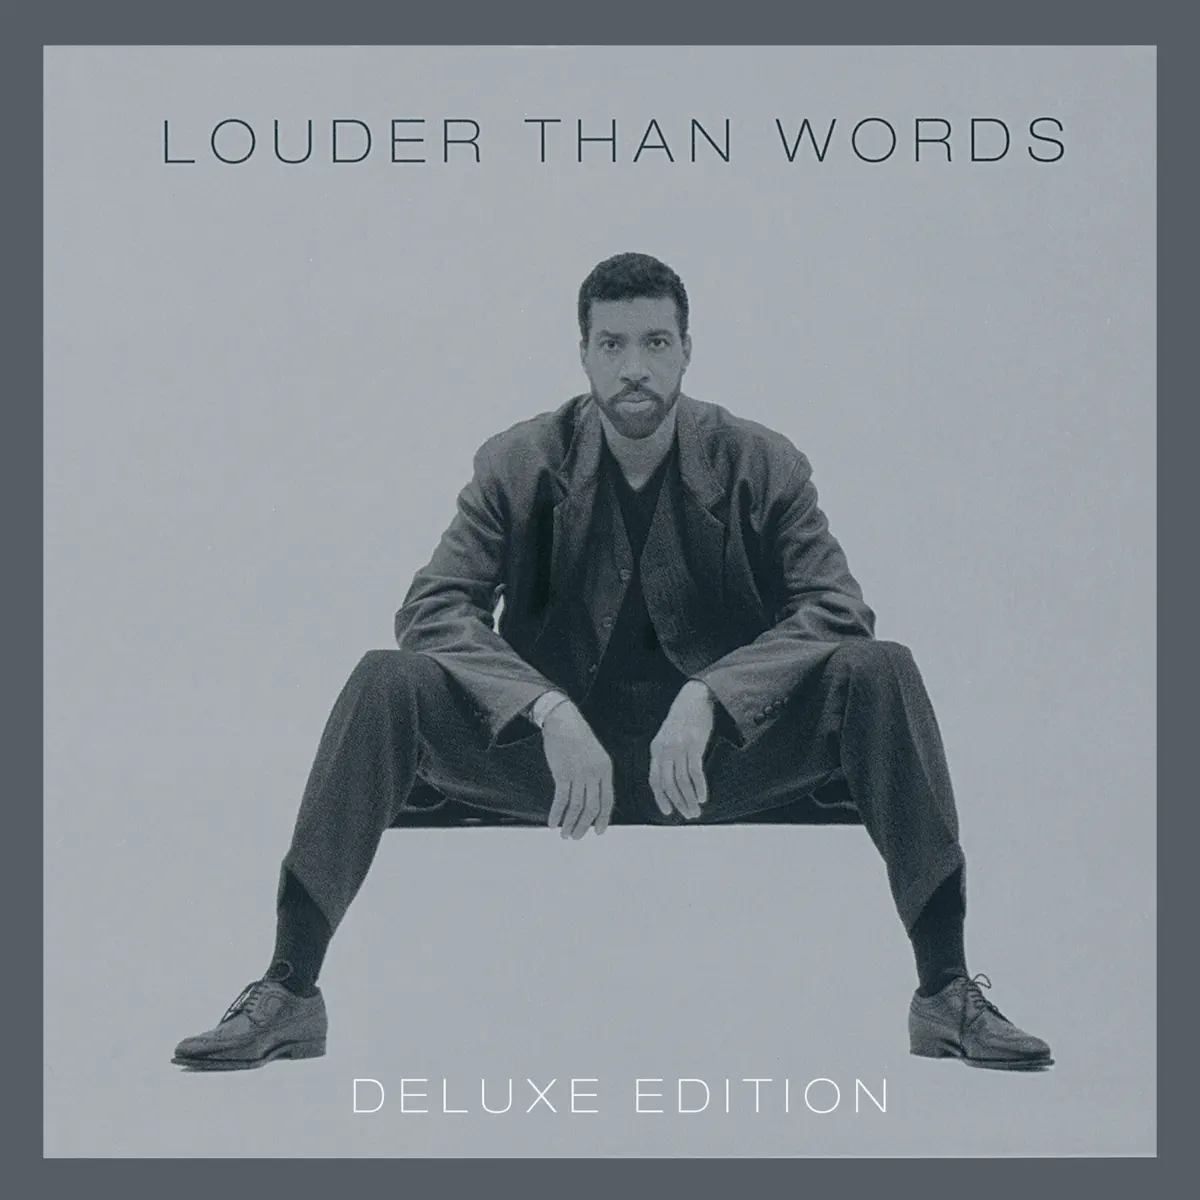 Lionel Richie - Louder Than Words (Deluxe Edition) (1996) [iTunes Plus AAC M4A]-新房子